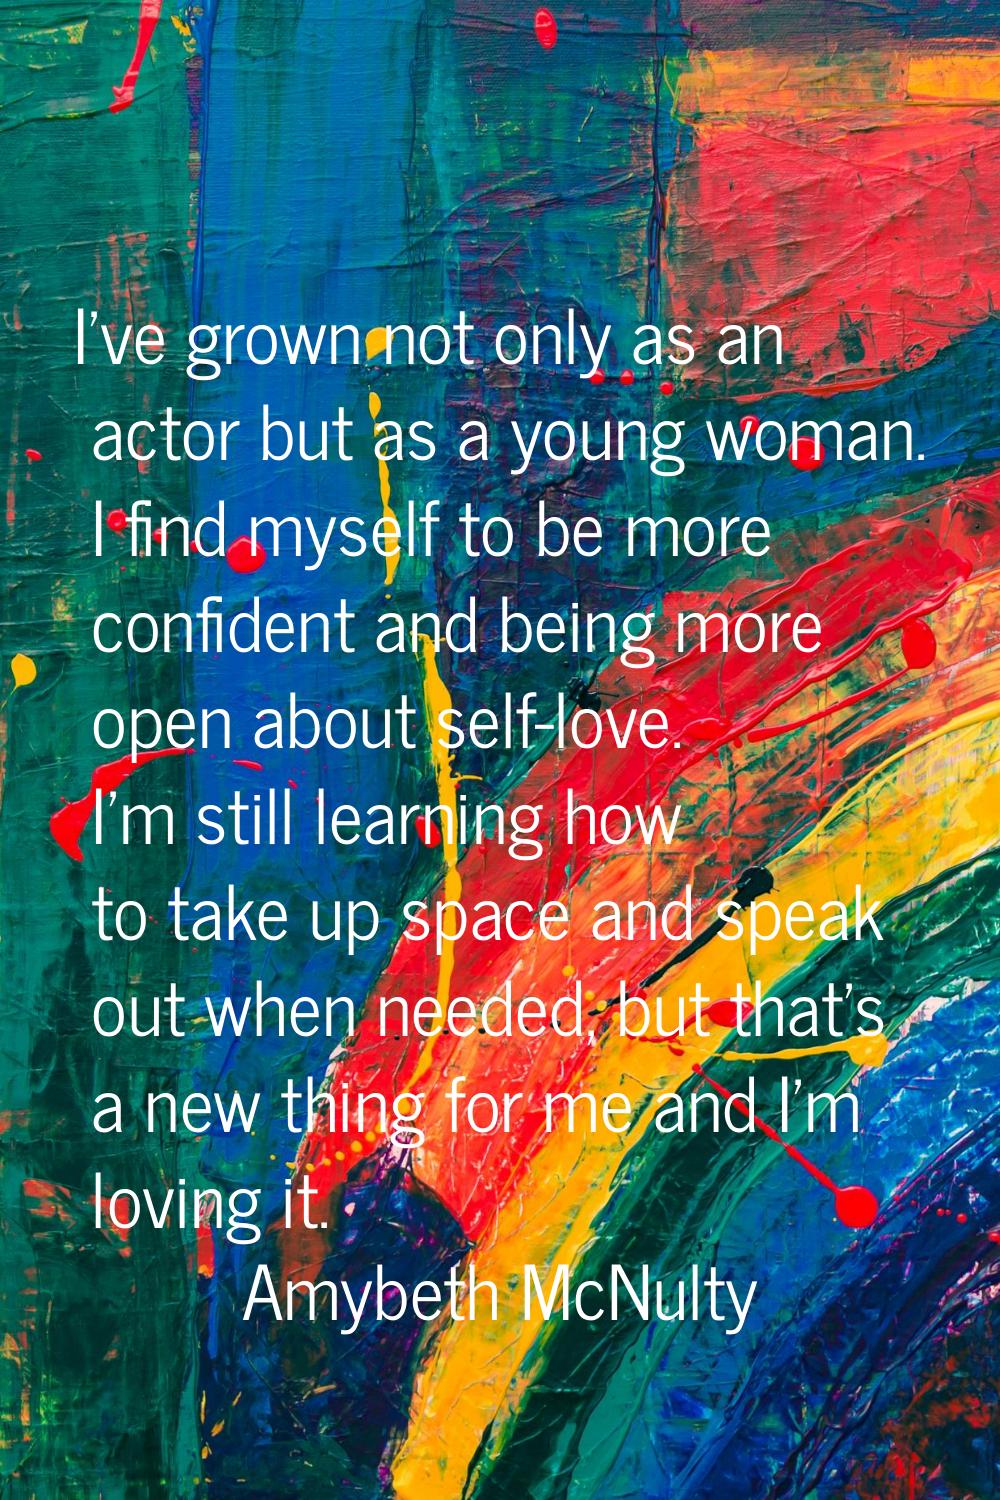 I've grown not only as an actor but as a young woman. I find myself to be more confident and being 